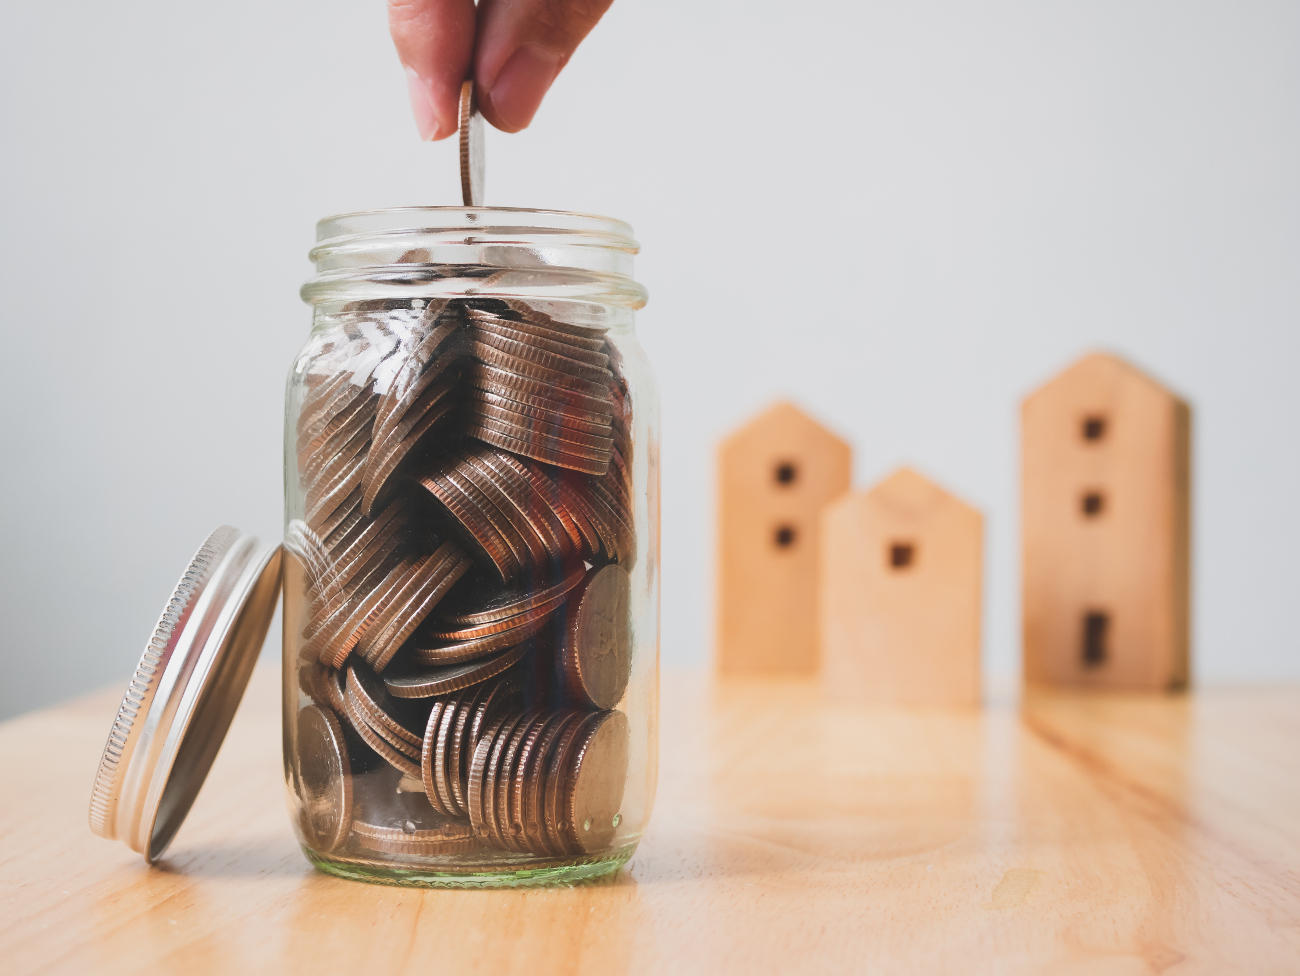 A glass jar filling with money as three wooden toy houses sit in the background.